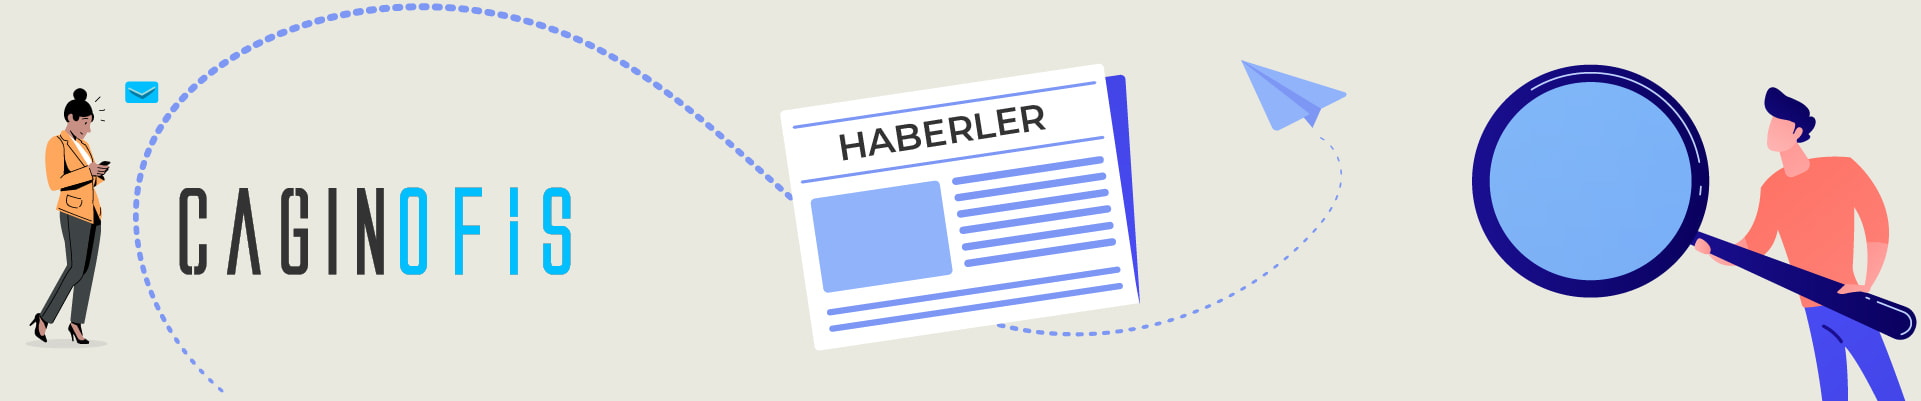 haber-page-banner